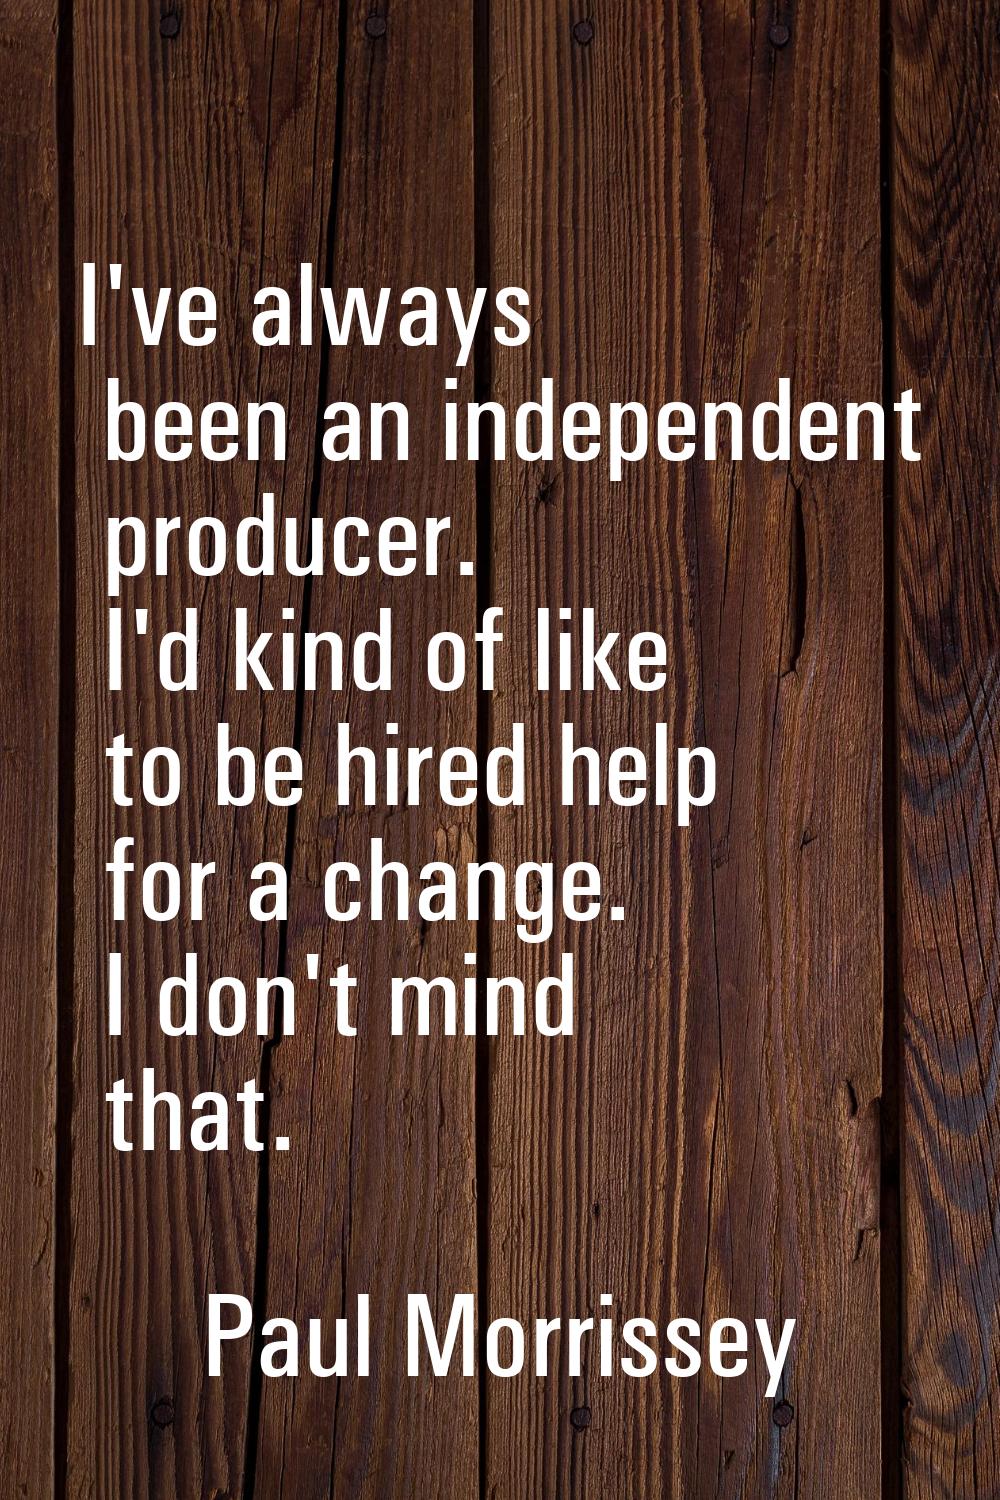 I've always been an independent producer. I'd kind of like to be hired help for a change. I don't m